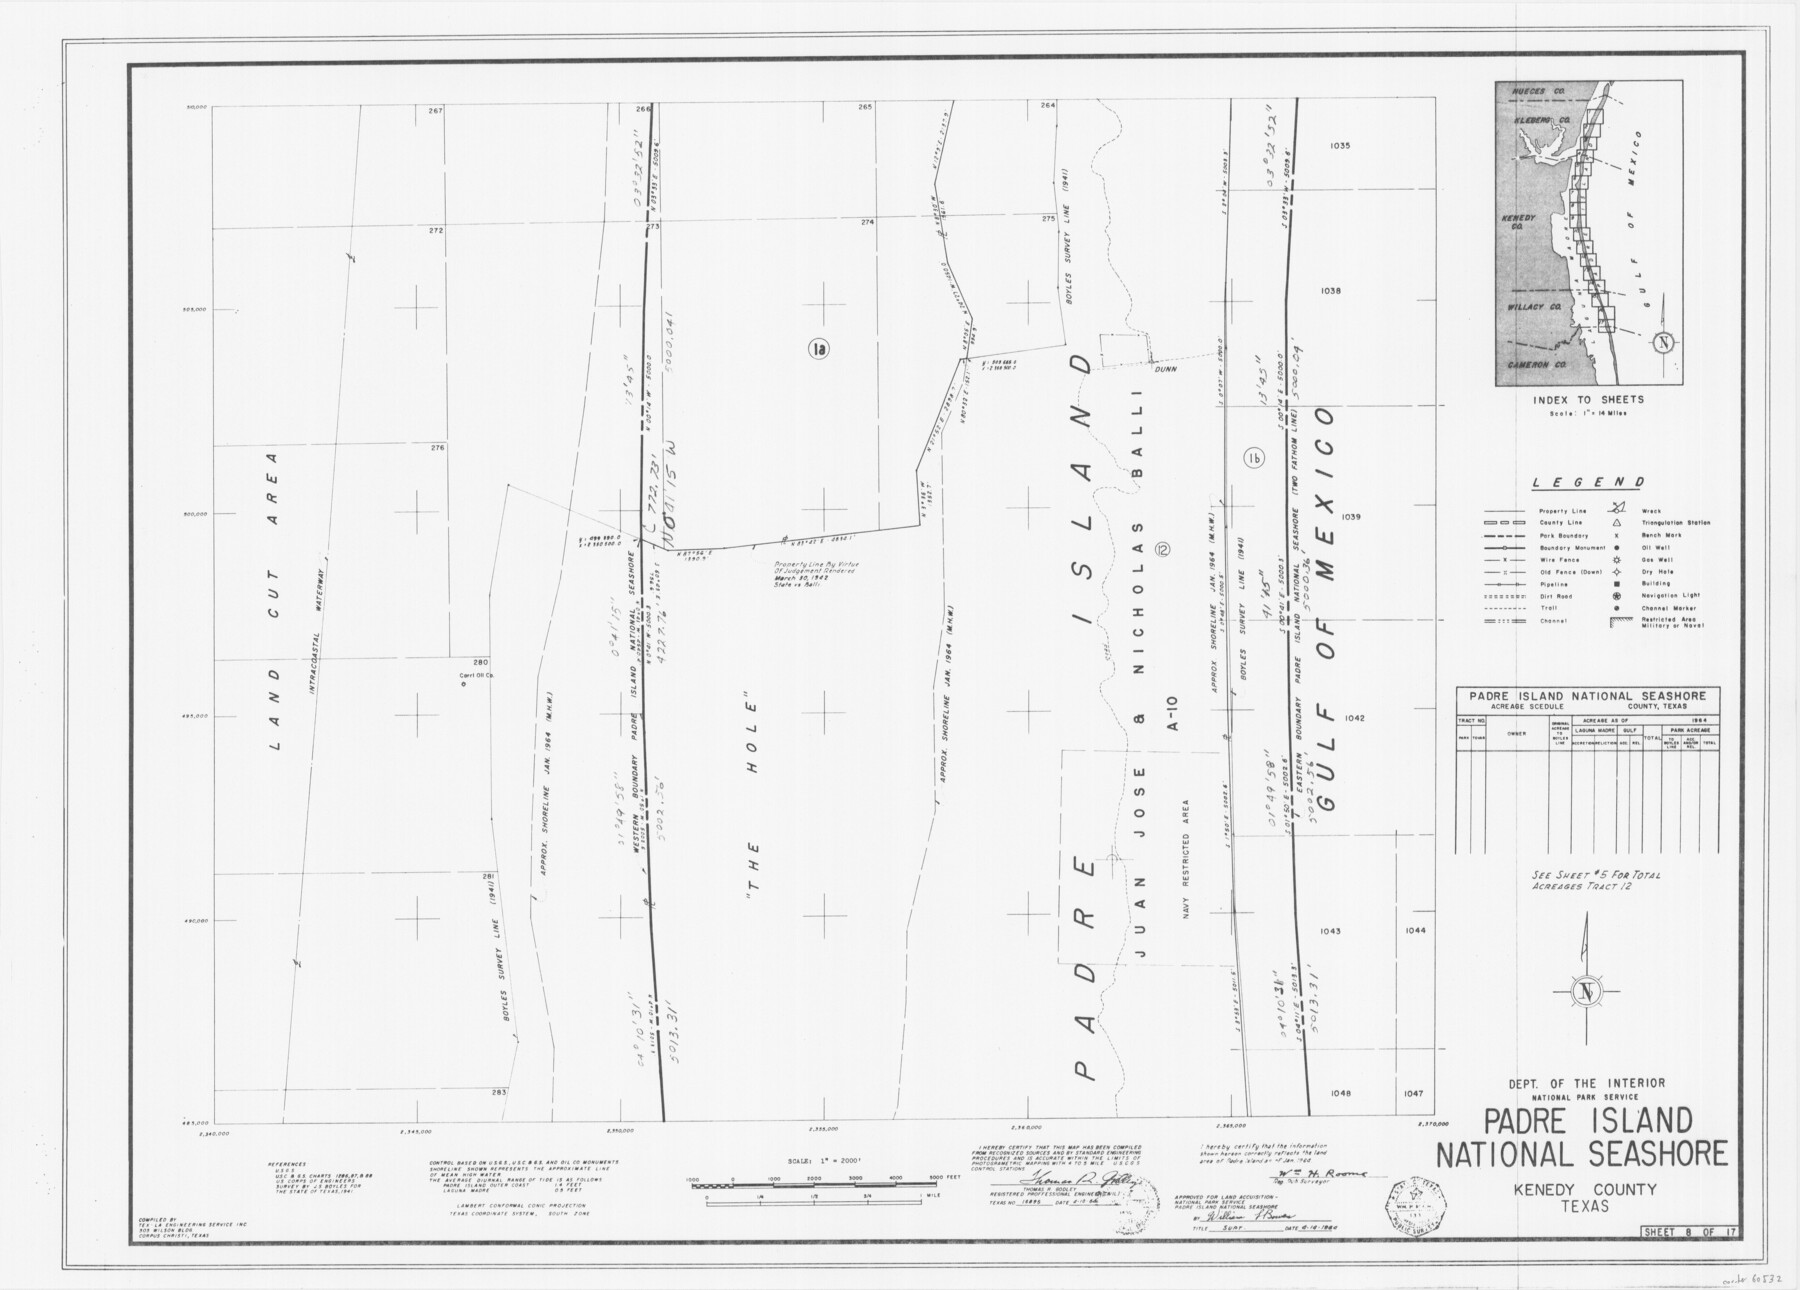 60532, Padre Island National Seashore, General Map Collection